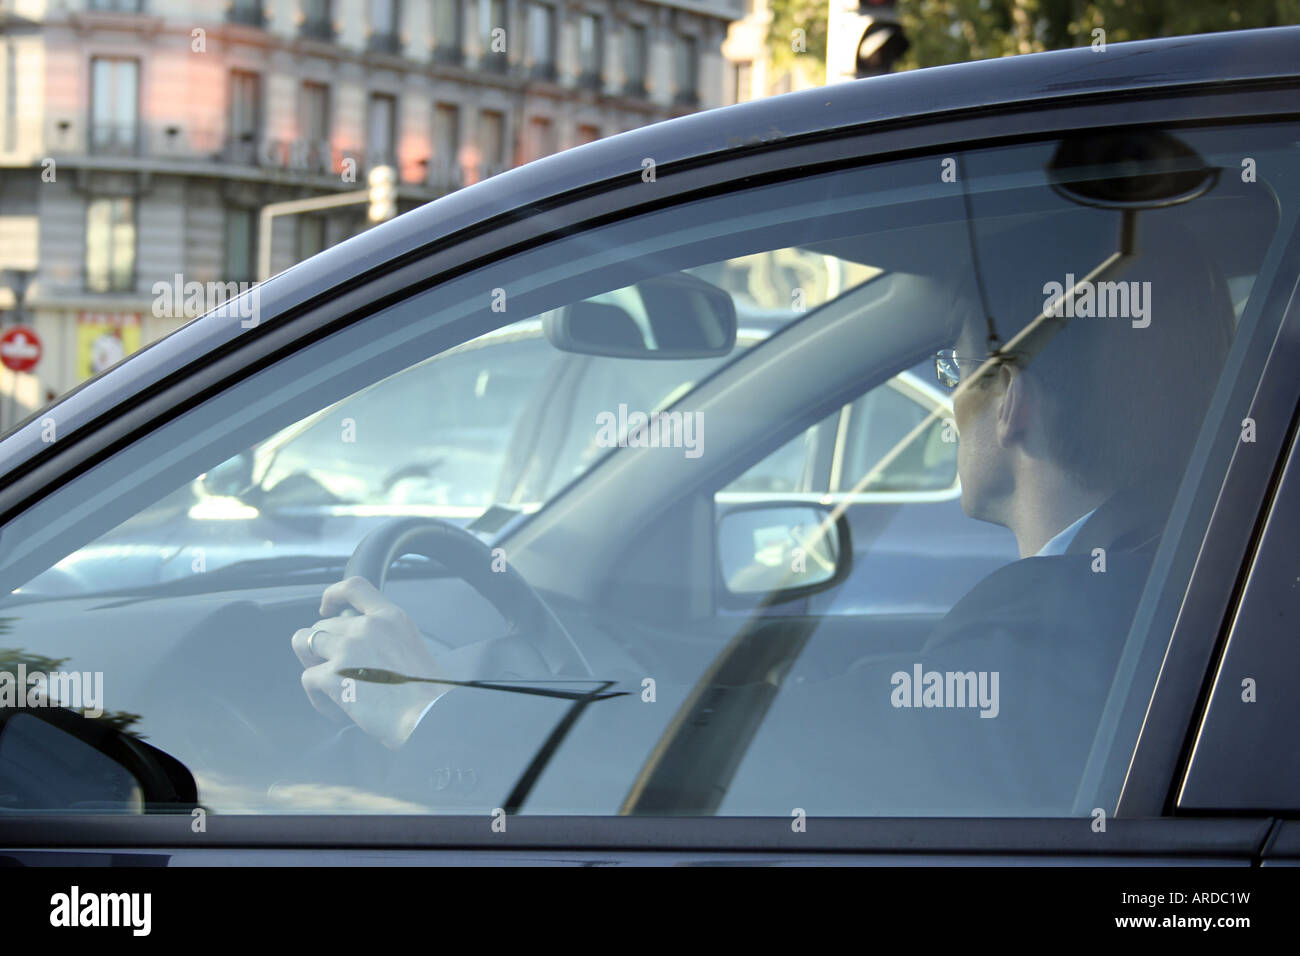 Businessman driving a fancy car in the town Stock Photo